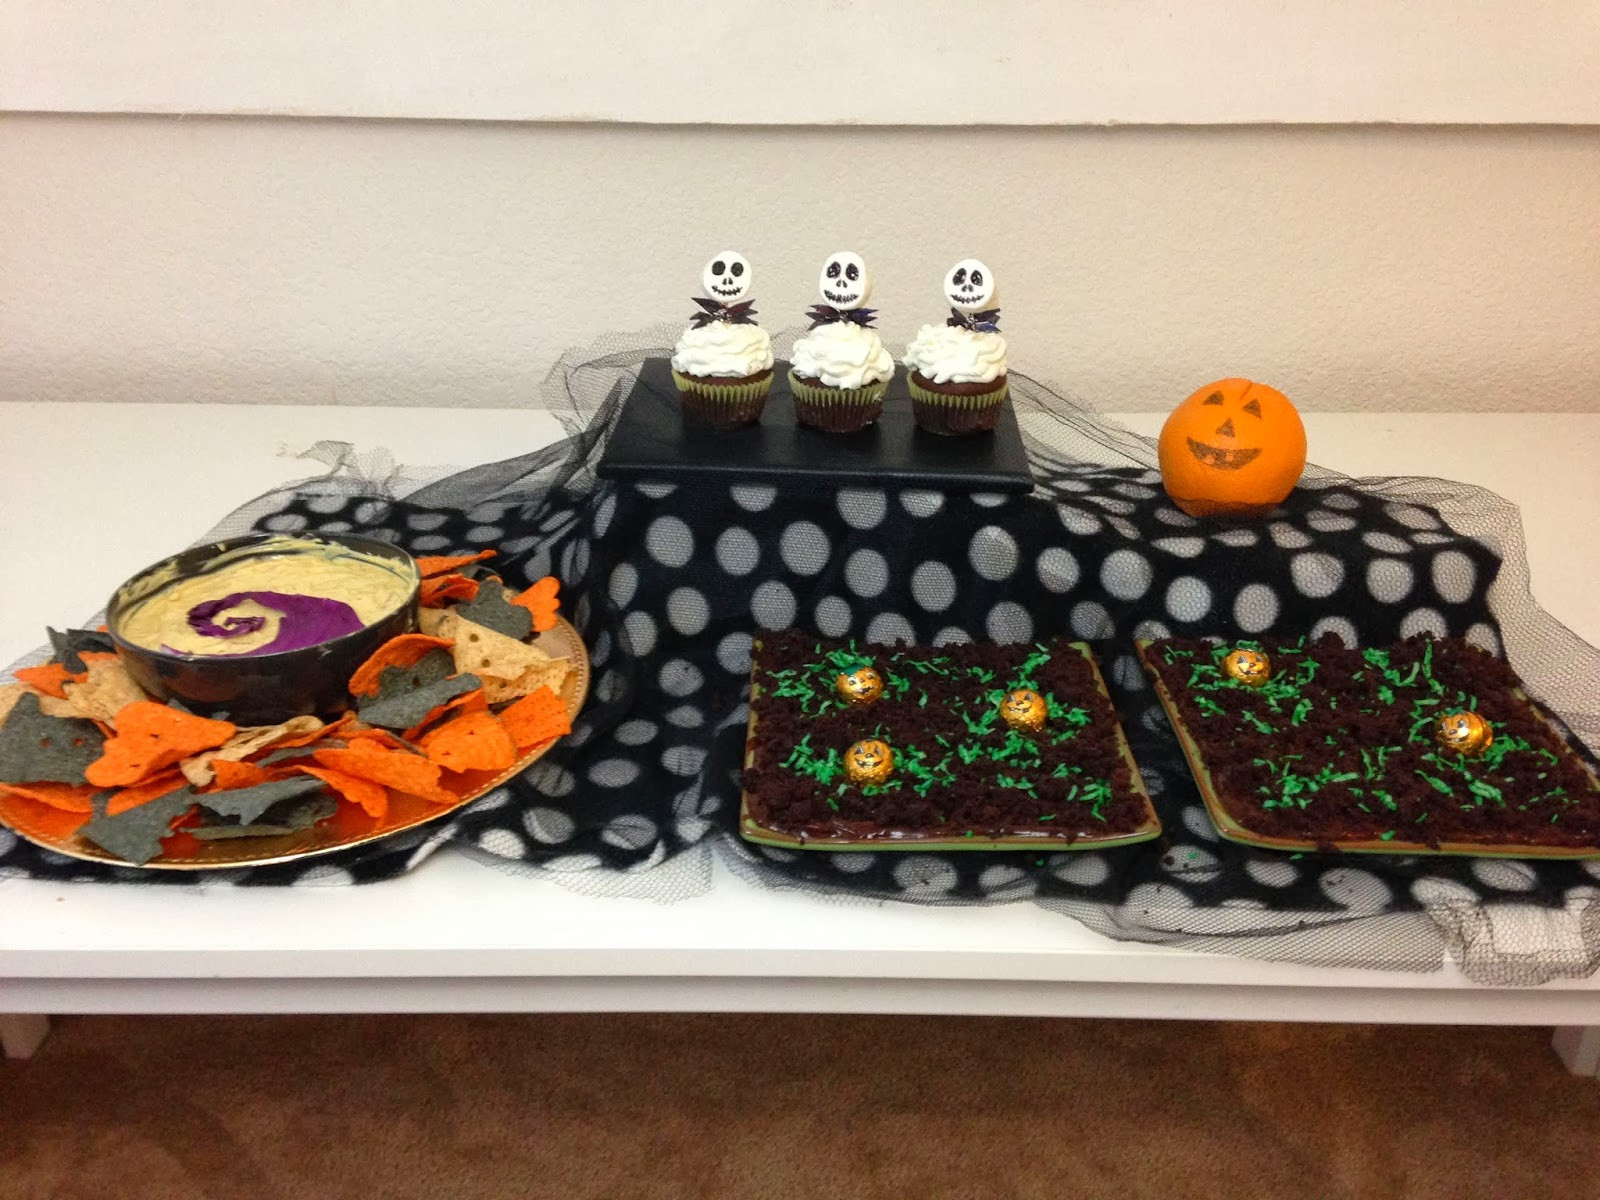 Nightmare Before Christmas Party Food Ideas
 Dating Made Fun The Nightmare Before Christmas Themed Date